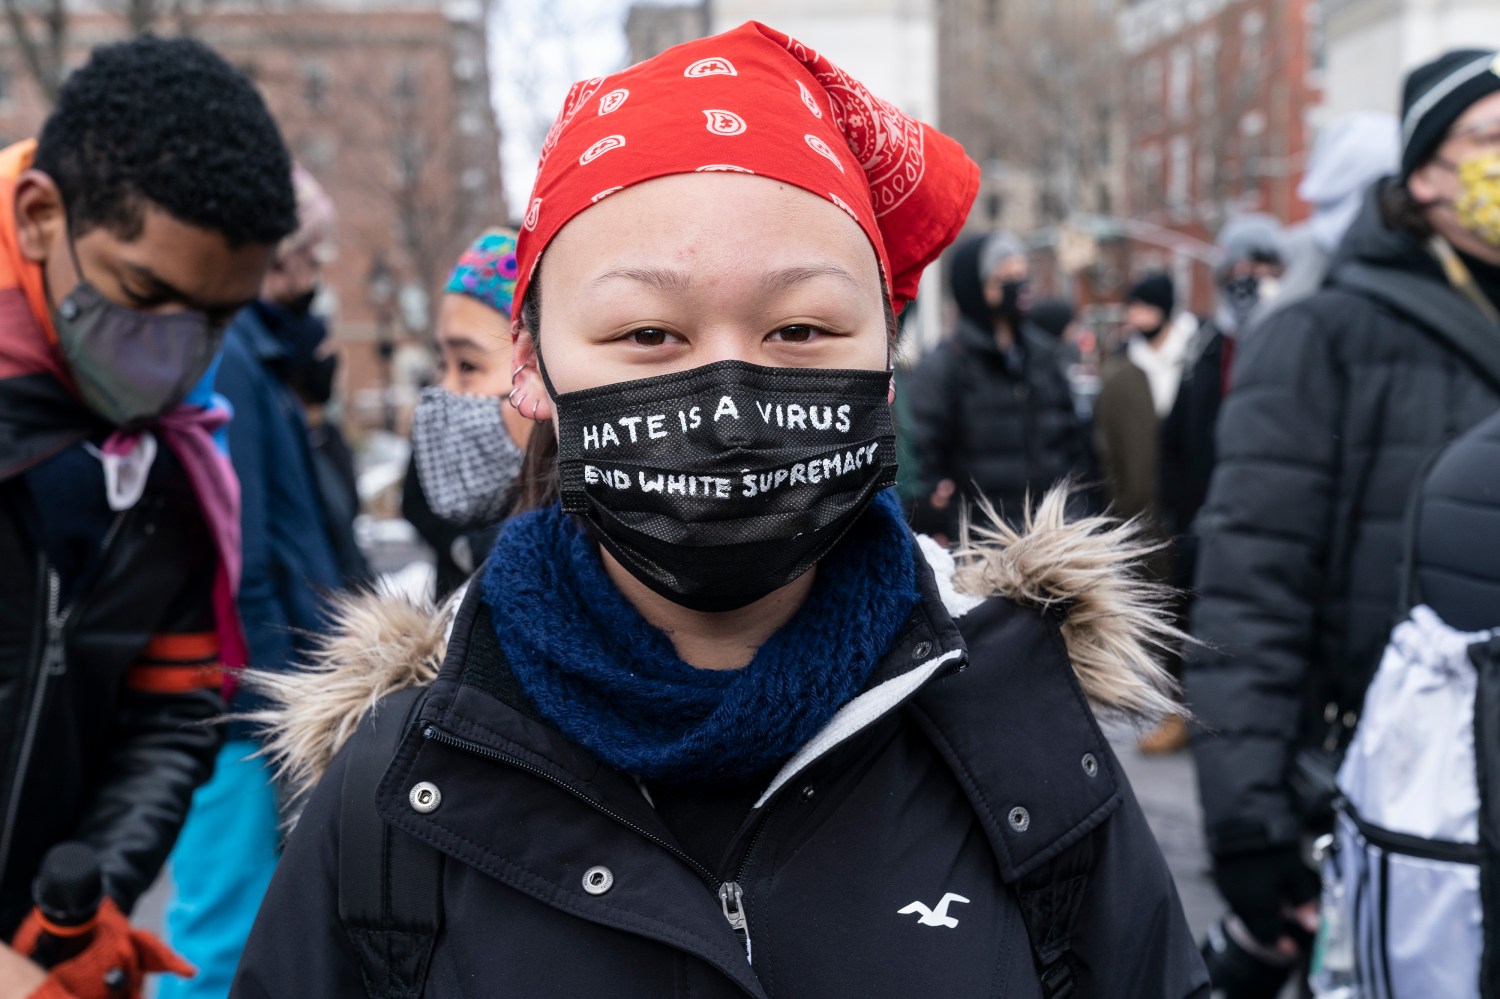 More than 200 people gathered on Washington Square Park to rally in support Aisian community, against hate crime and white nationalism. Rally held in New York on February 20, 2021. Rally was organized by ANTIFA (anti-fascist movement) and Abolitionist Community. A woman wears mask with message 'Hate is A Virus End White Supremacy'. (Photo by Lev Radin/Sipa USA)No Use Germany.